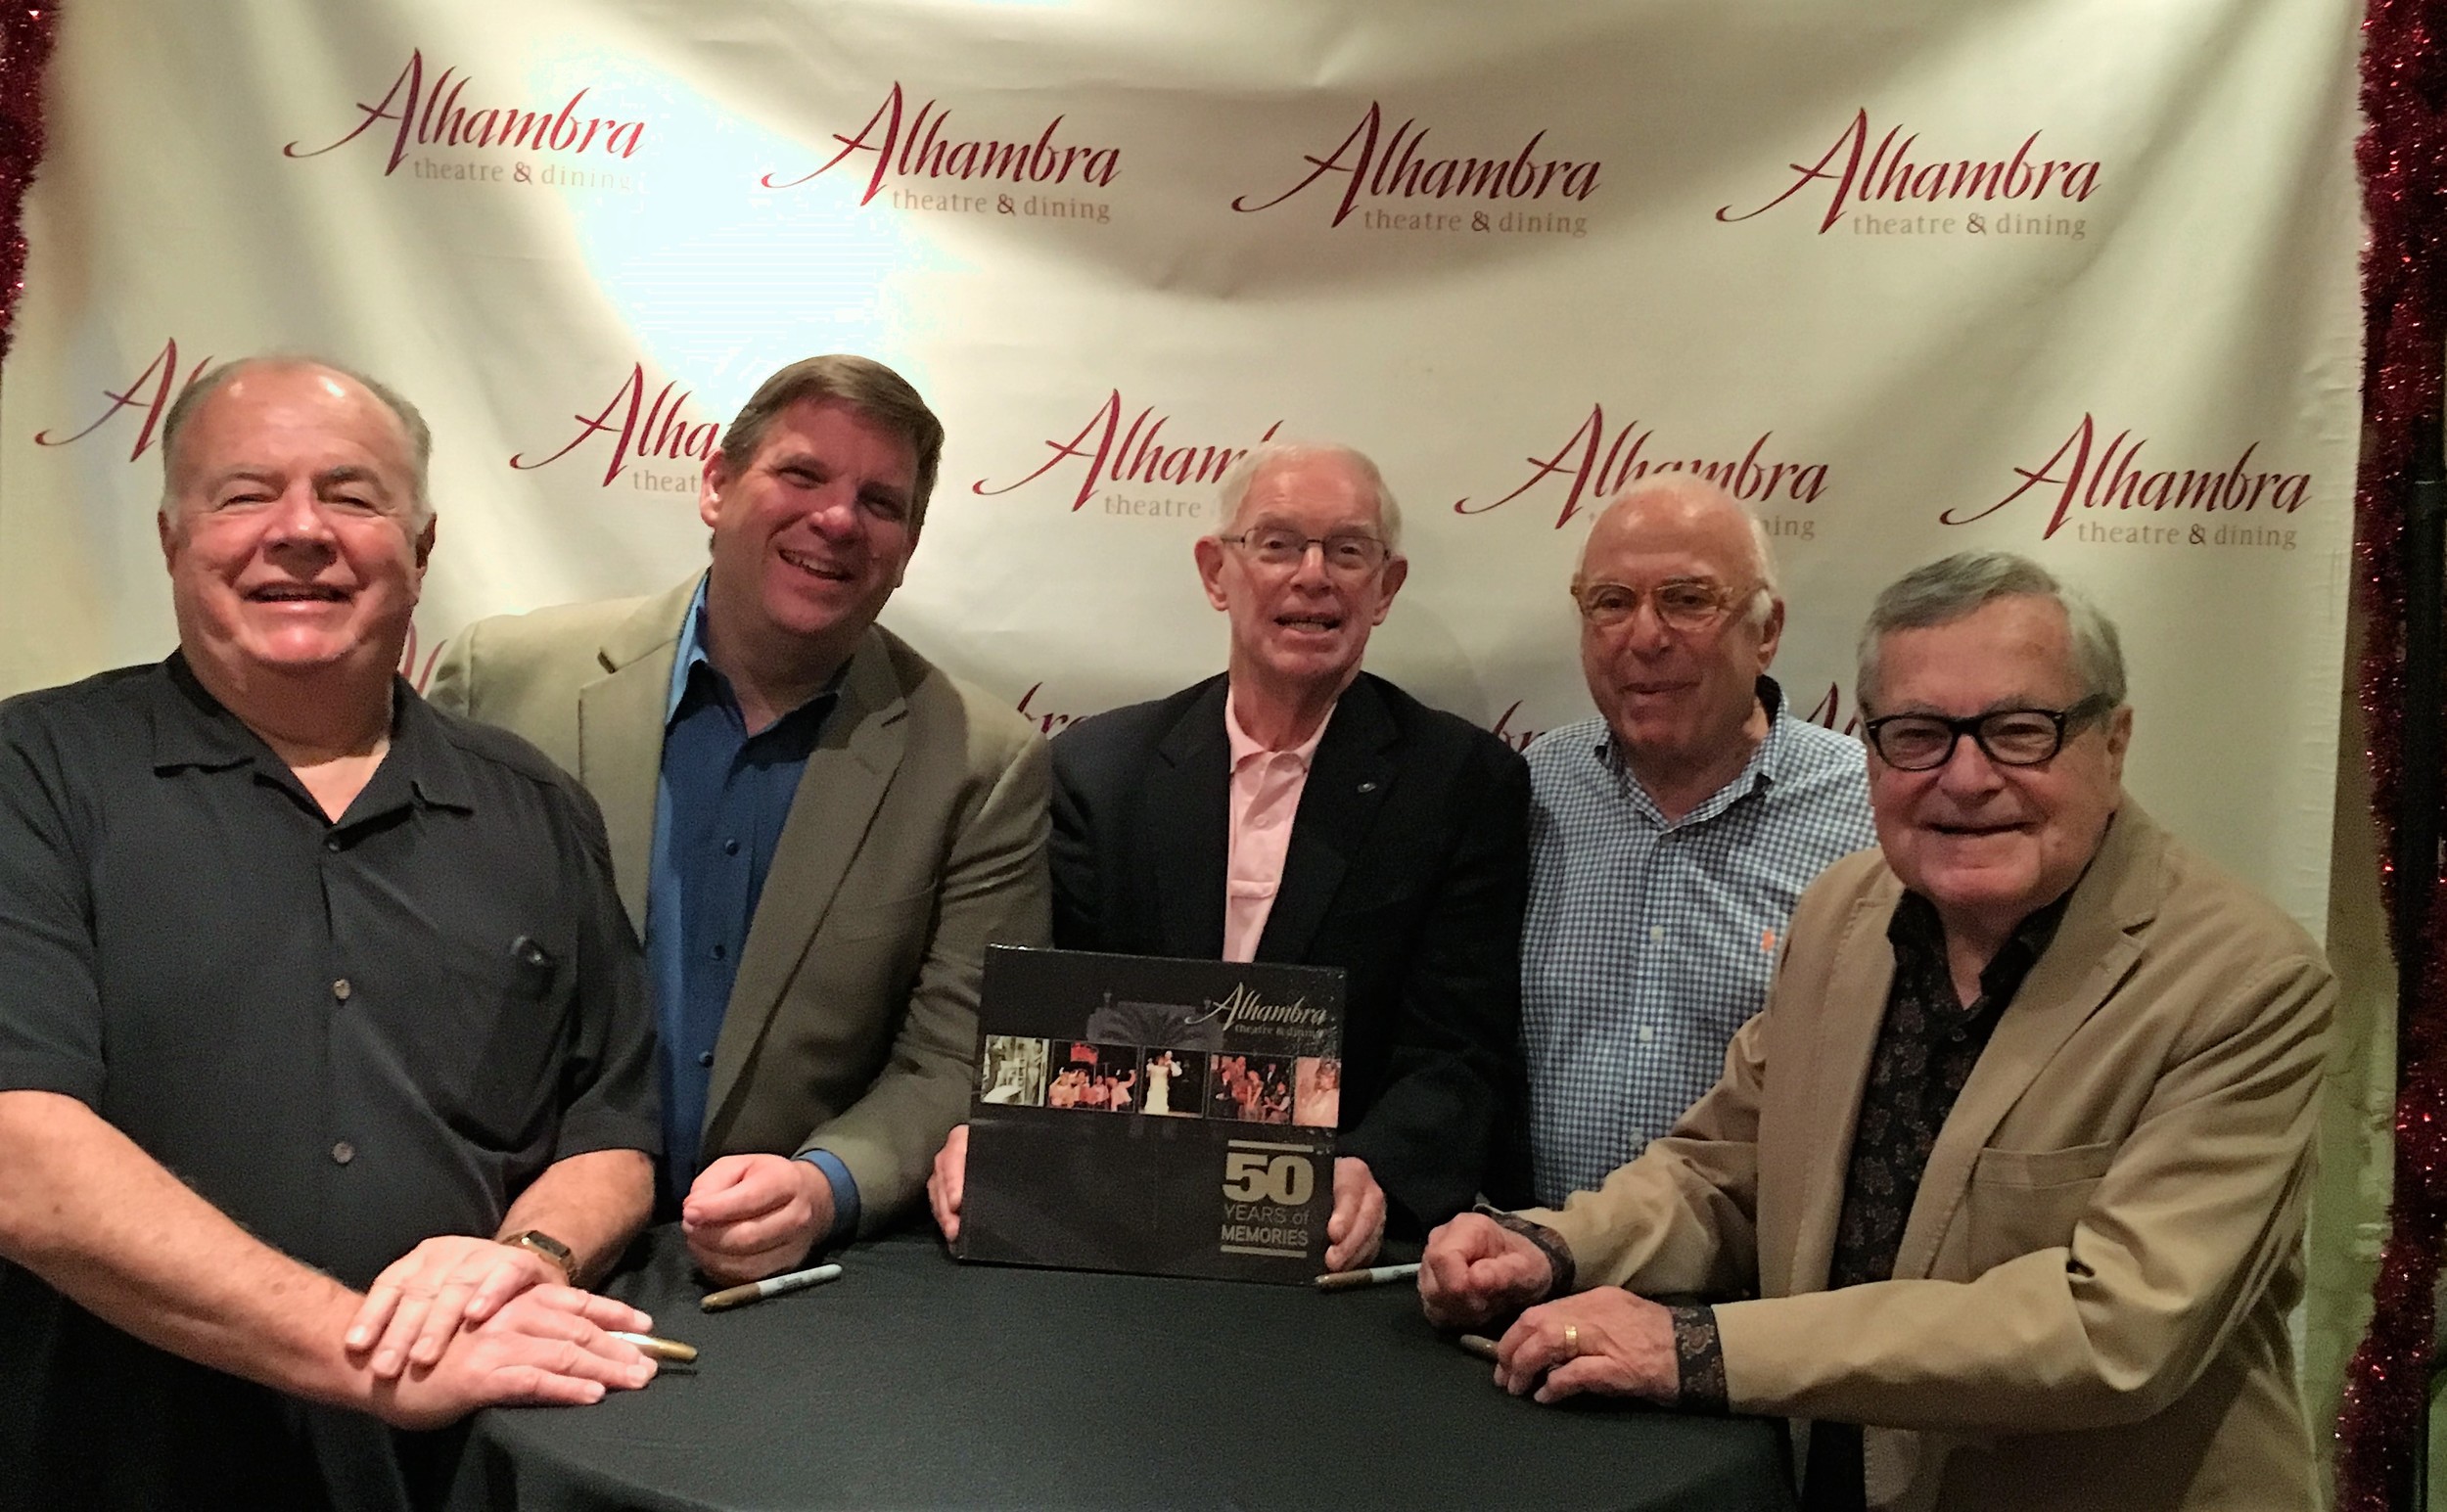 Three generations of Alhambra Theatre & Dining owners gather for a book signing marking the release of “The Alhambra Theatre & Dining: 50 Years of Memories.” From left: Former owner and current director Tod Booth, current owner and Managing Partner Craig Smith, author Charles Day, and original owners Ted Johnson and George Ballis.